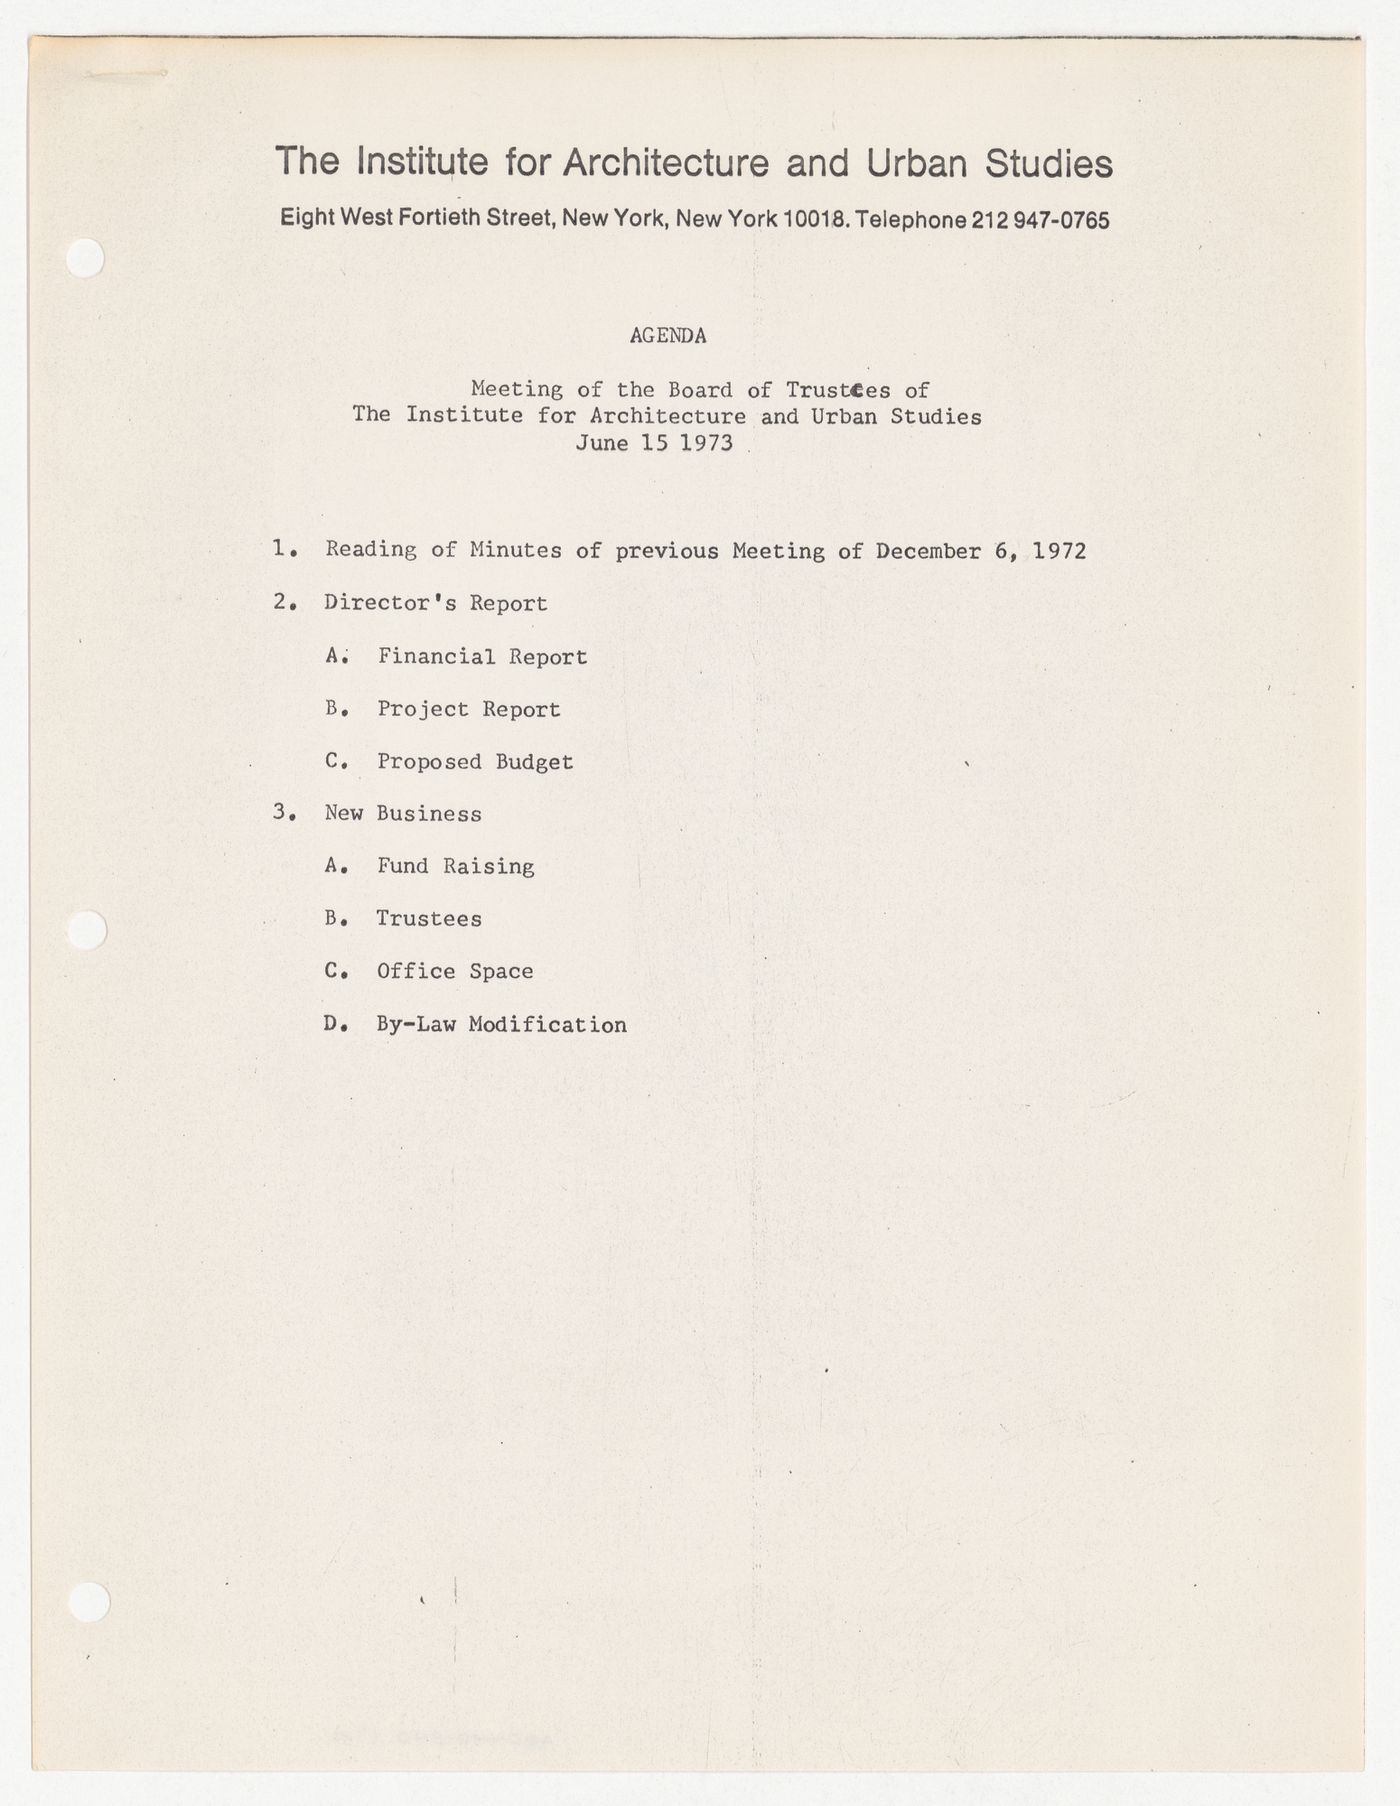 Agenda for meeting of the Board of Trustees with attached debt list, current accounts payable, proposed budget for financial year 1973-1974, and projected income for financial year 1973-1974